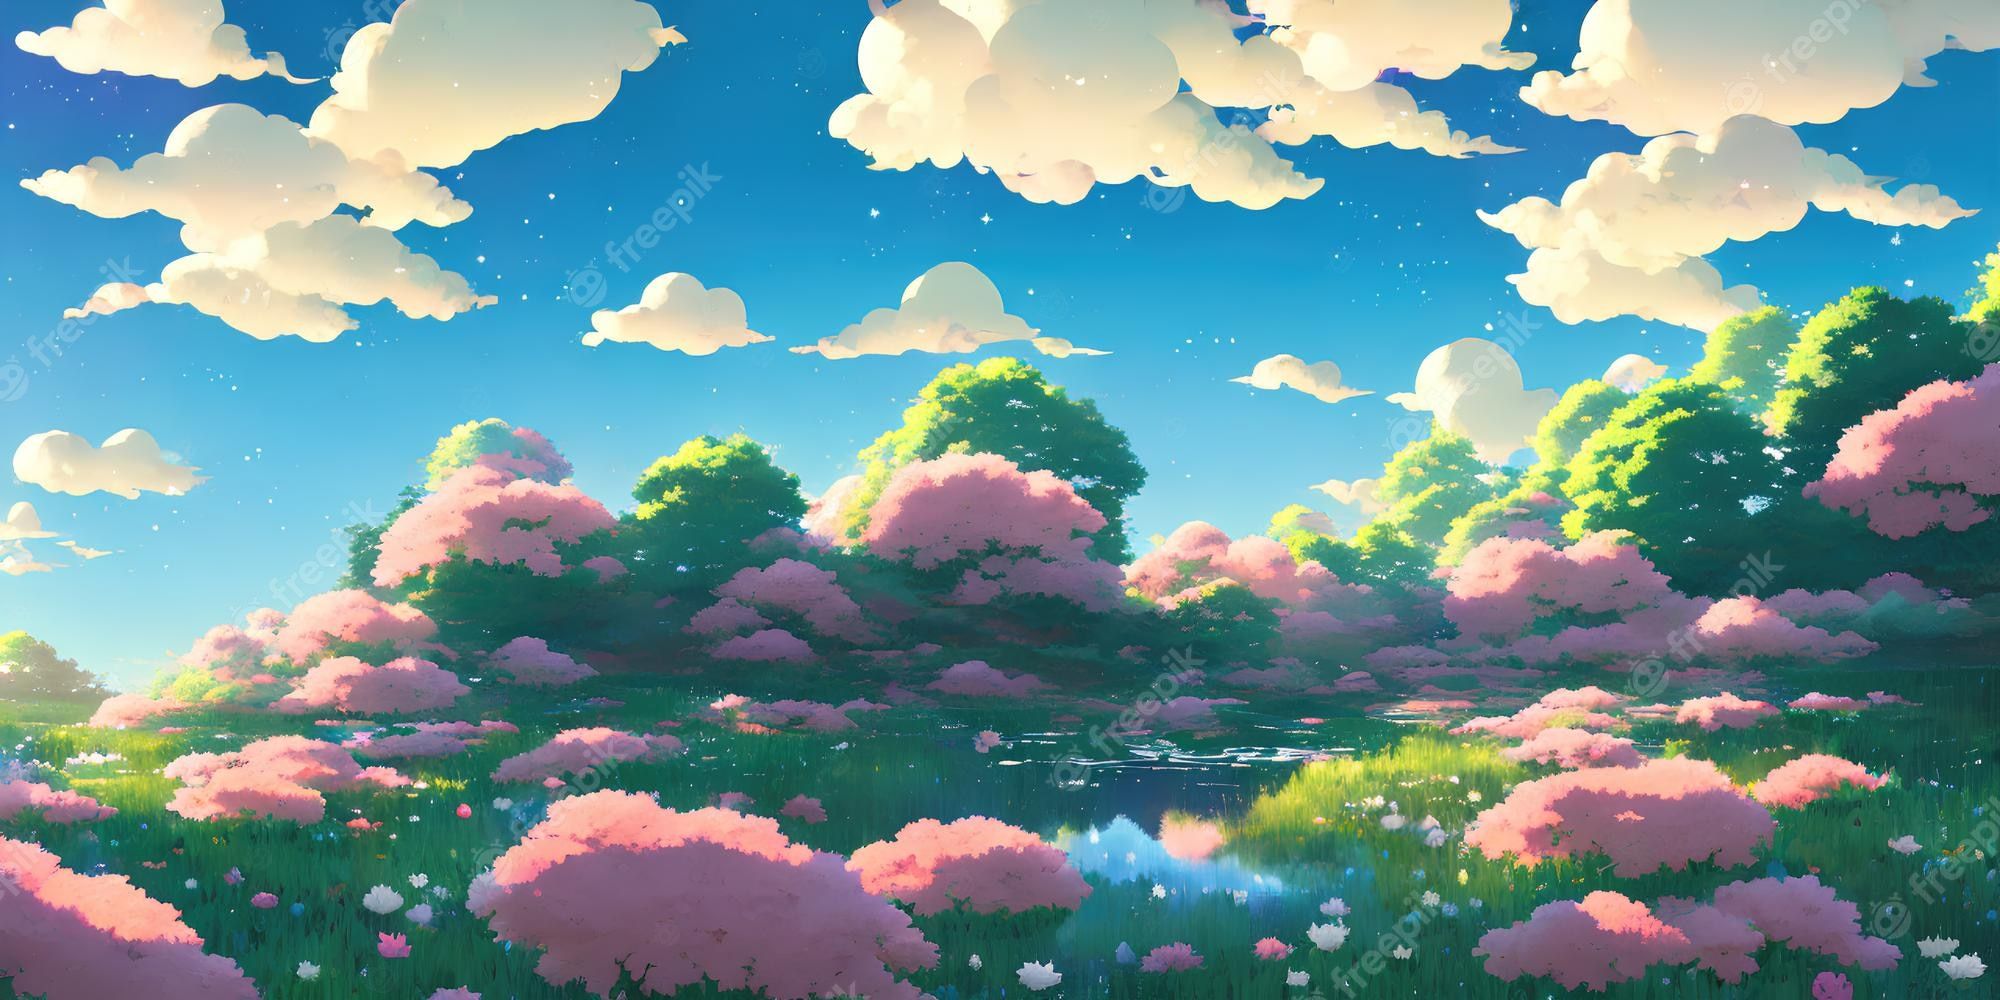 Premium Photo. Natural anime landscape with bright sky and juicy colors